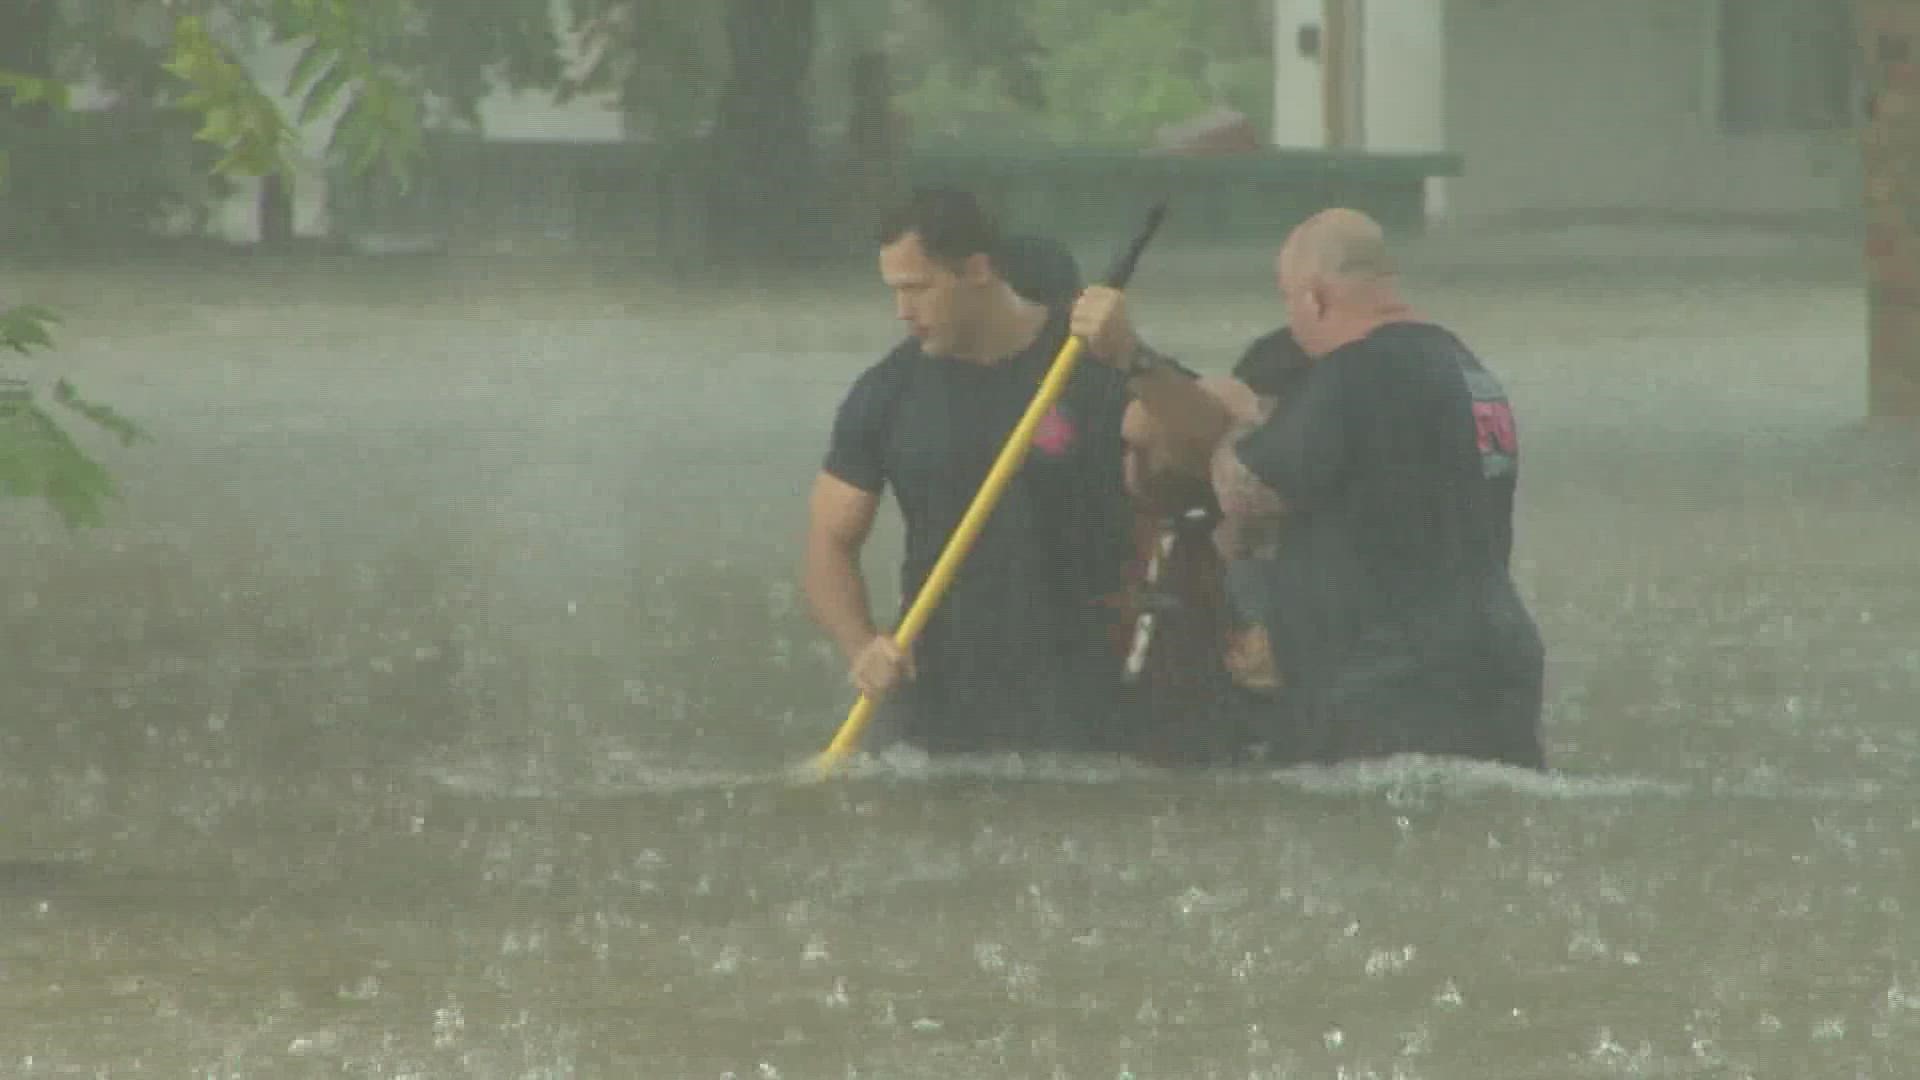 North Texas residents were shocked at Monday's rainfall, which was one for the record books.